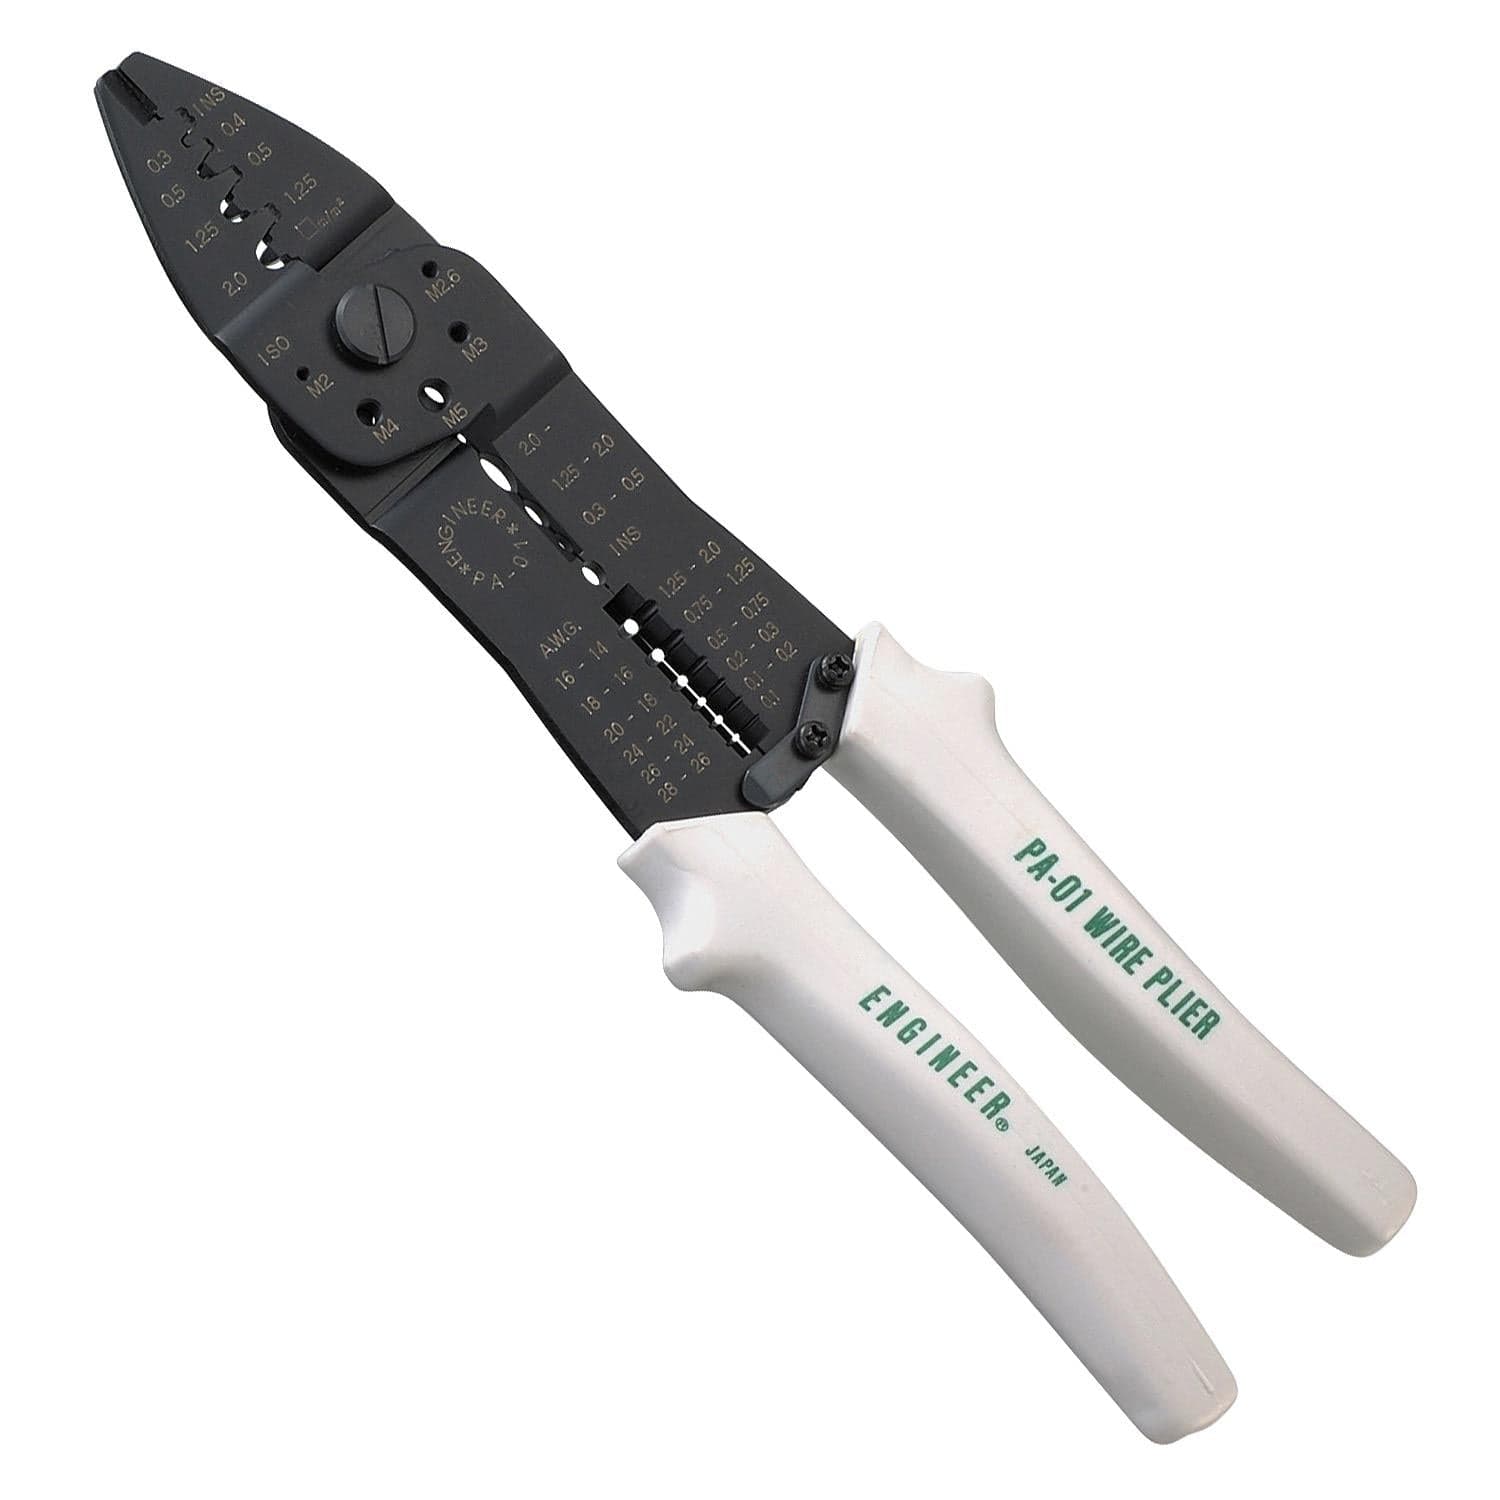 Engineer 6-in-1 Crimping/Wiring Multi-tool - The Pi Hut